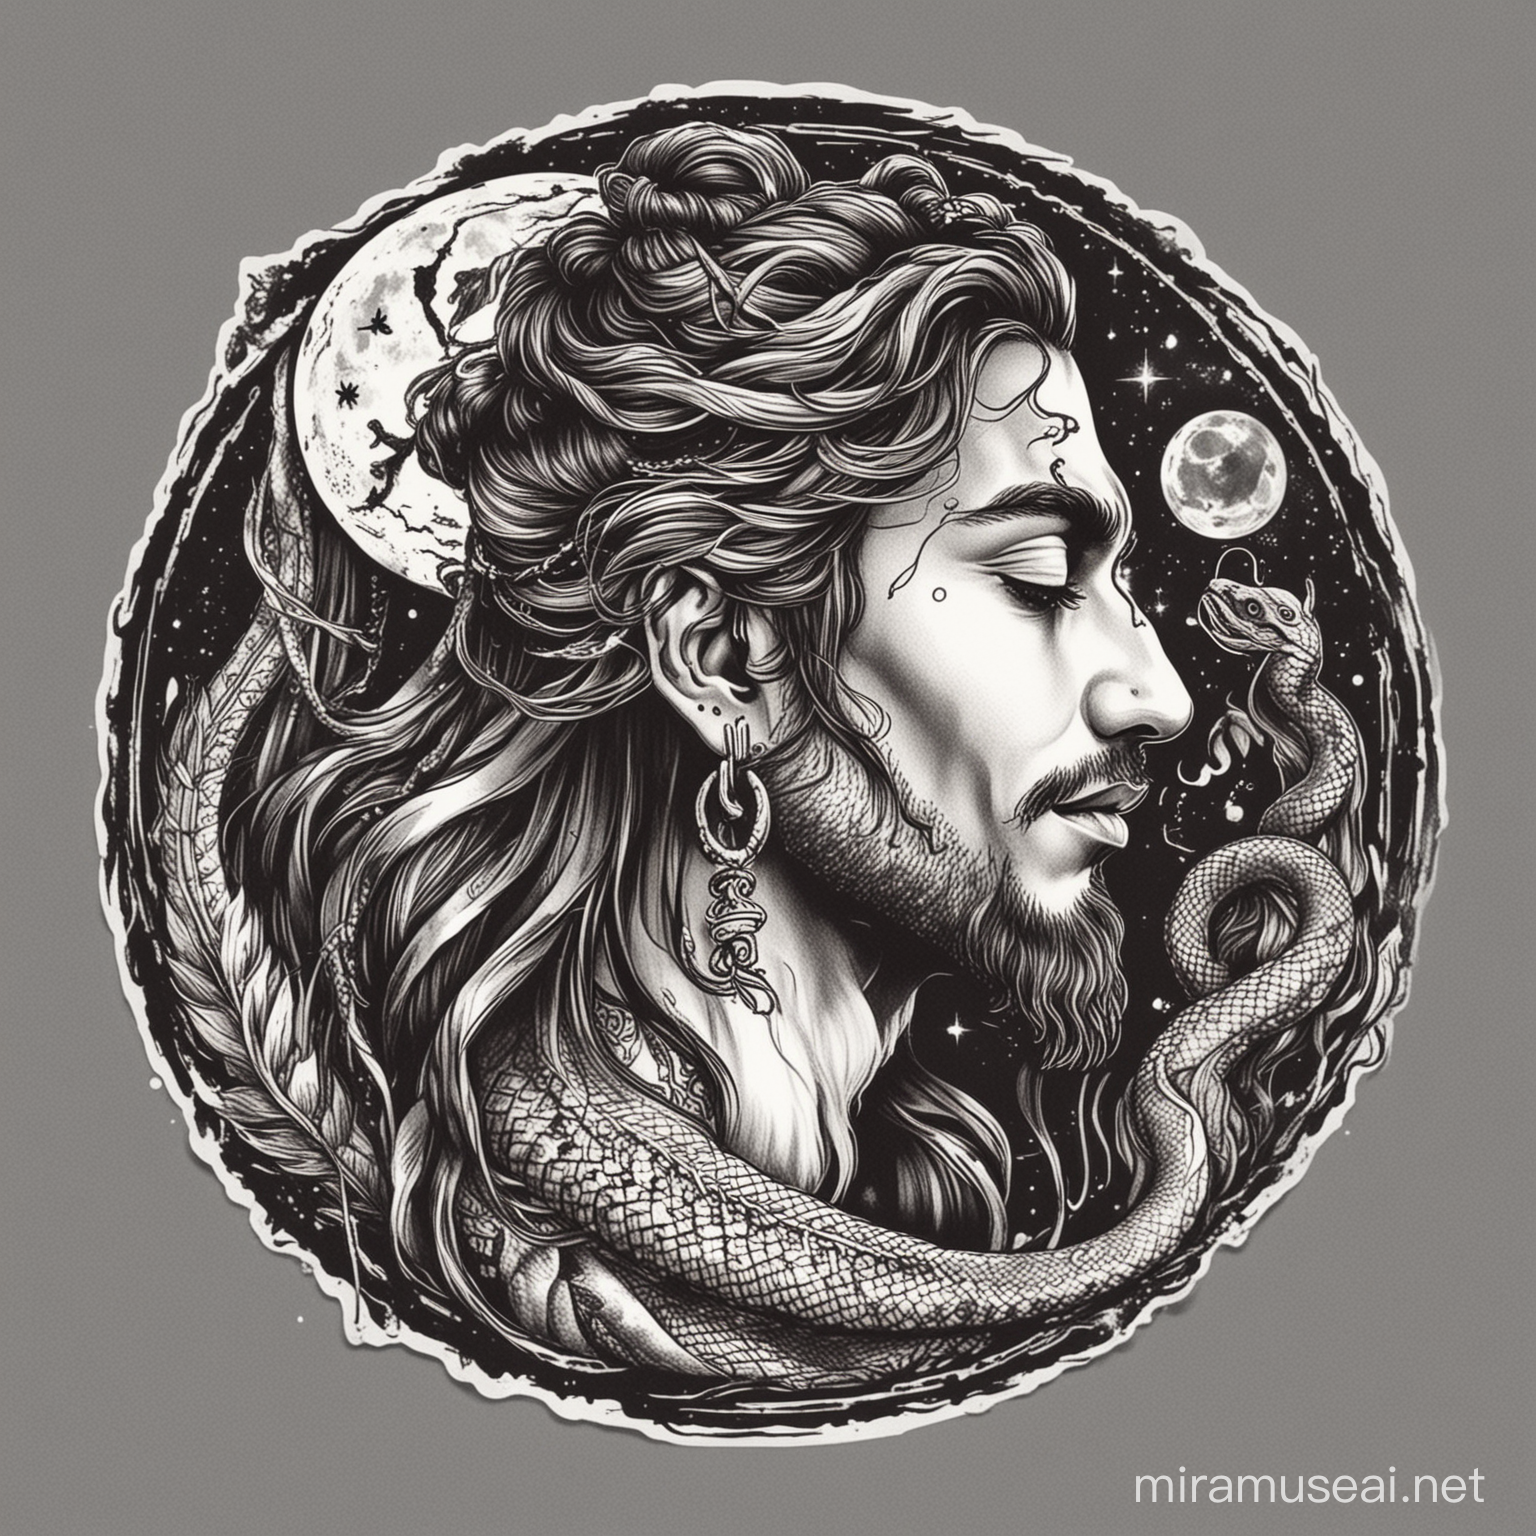 I want a sticker with shiva side profile focus on face, thrid eye long hair with man bun having snake, moon and rudraksham The image should be in the sticker format, line art, tattoo